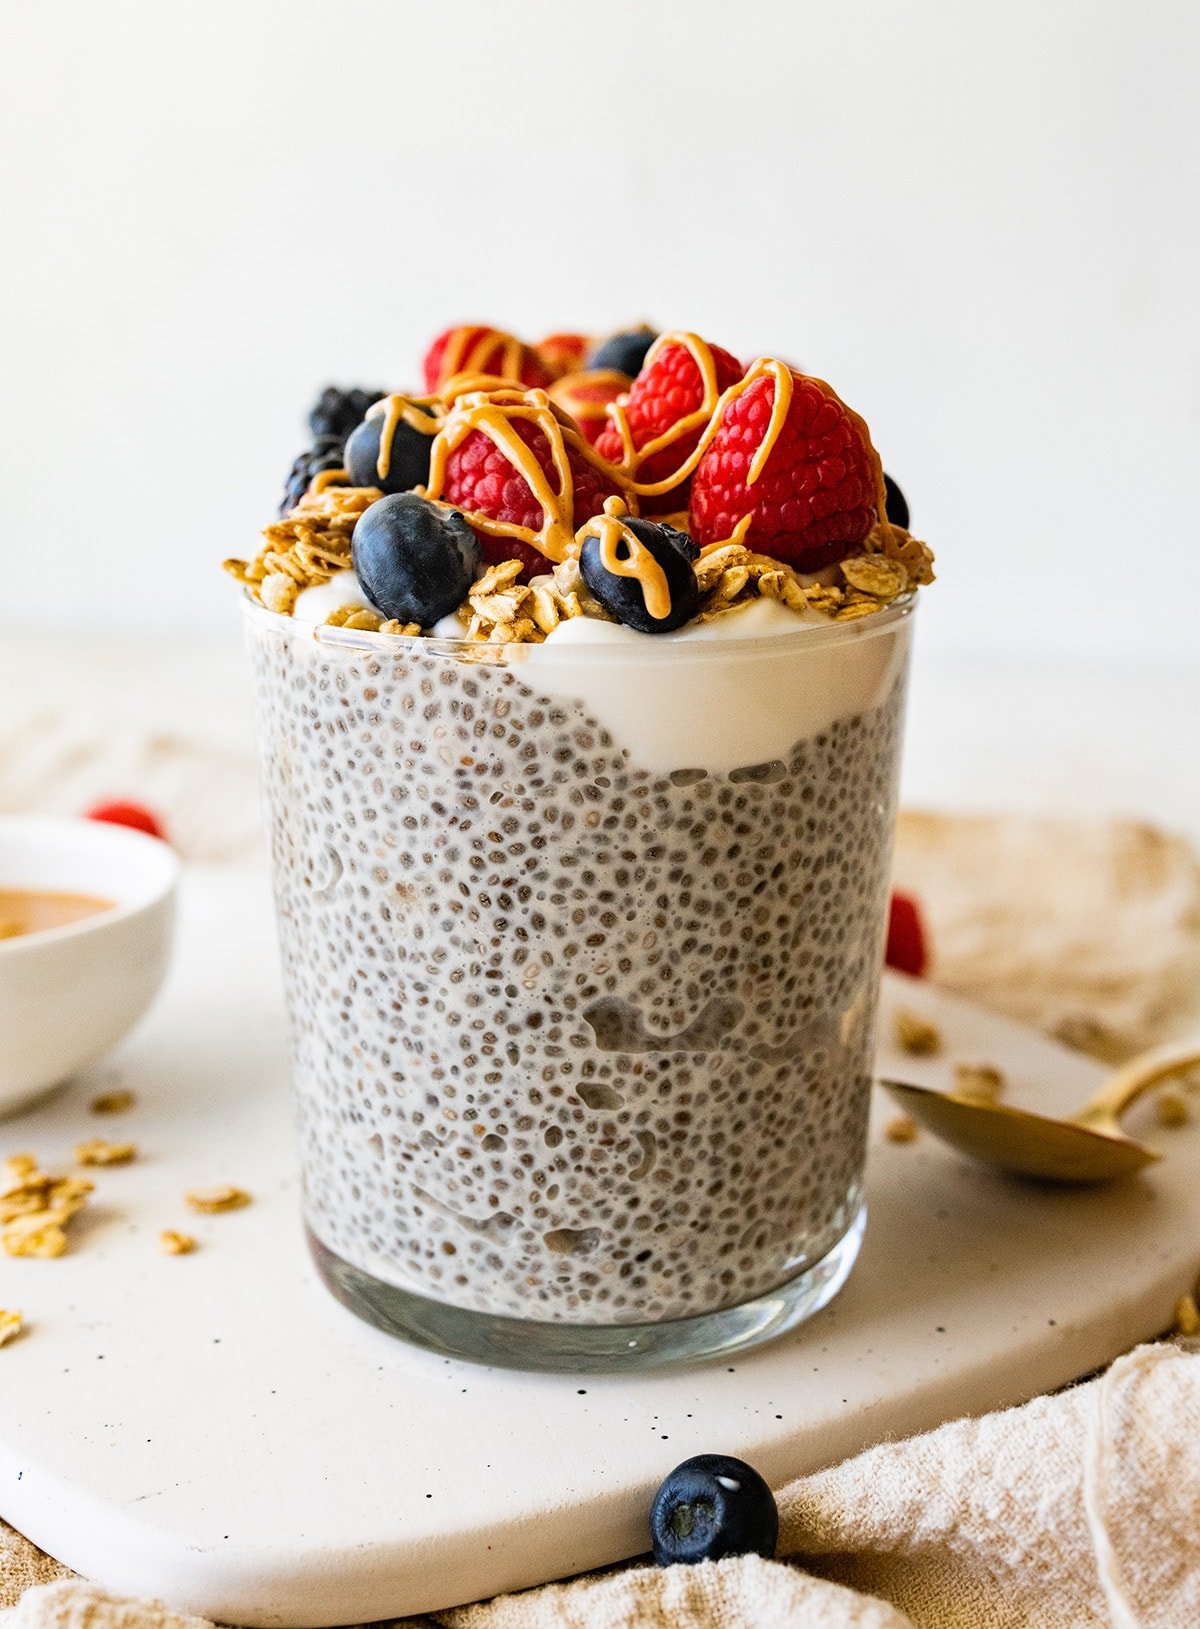 One protein chia pudding jar topped with fresh raspberries, blueberries, blackberries, greek yogurt and a drizzle of nut butter.